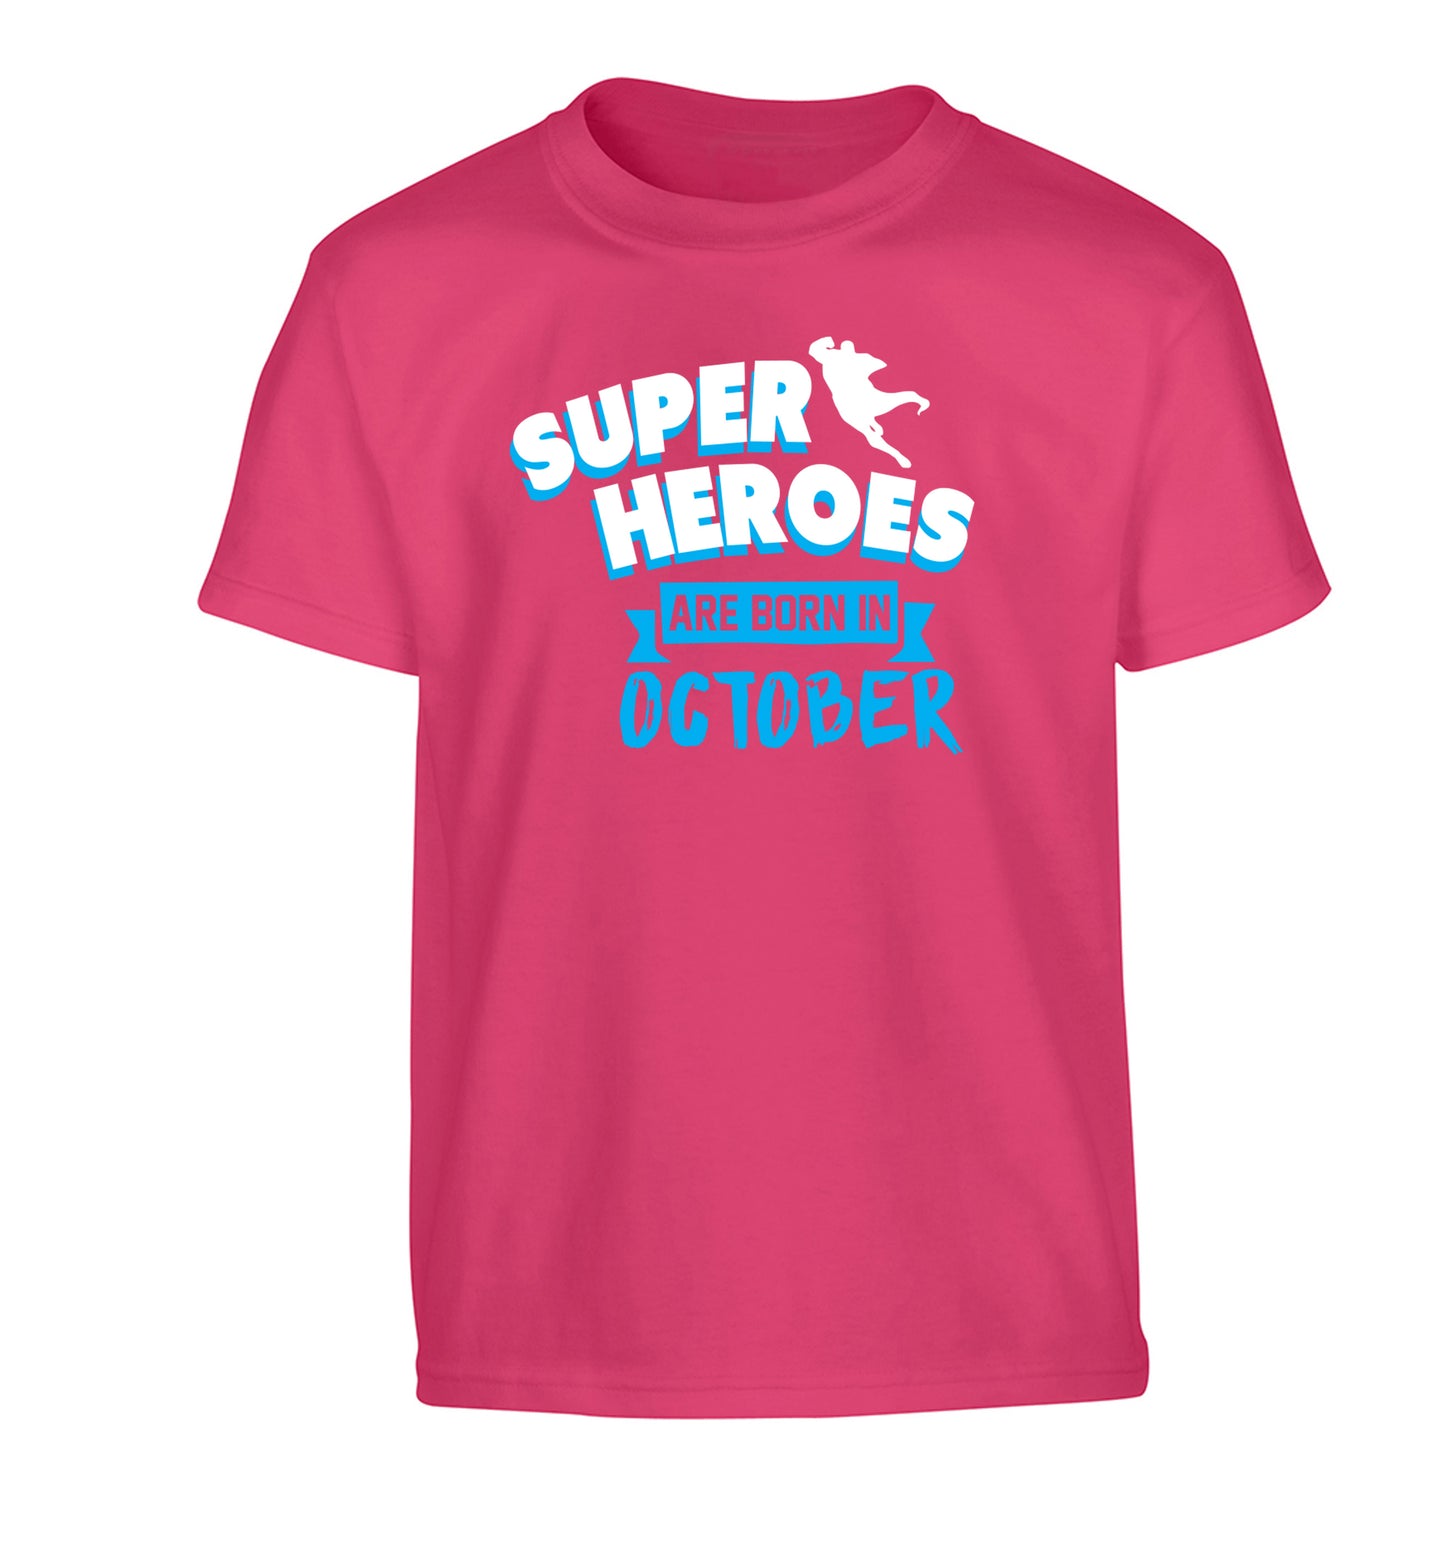 Superheroes are born in October Children's pink Tshirt 12-13 Years